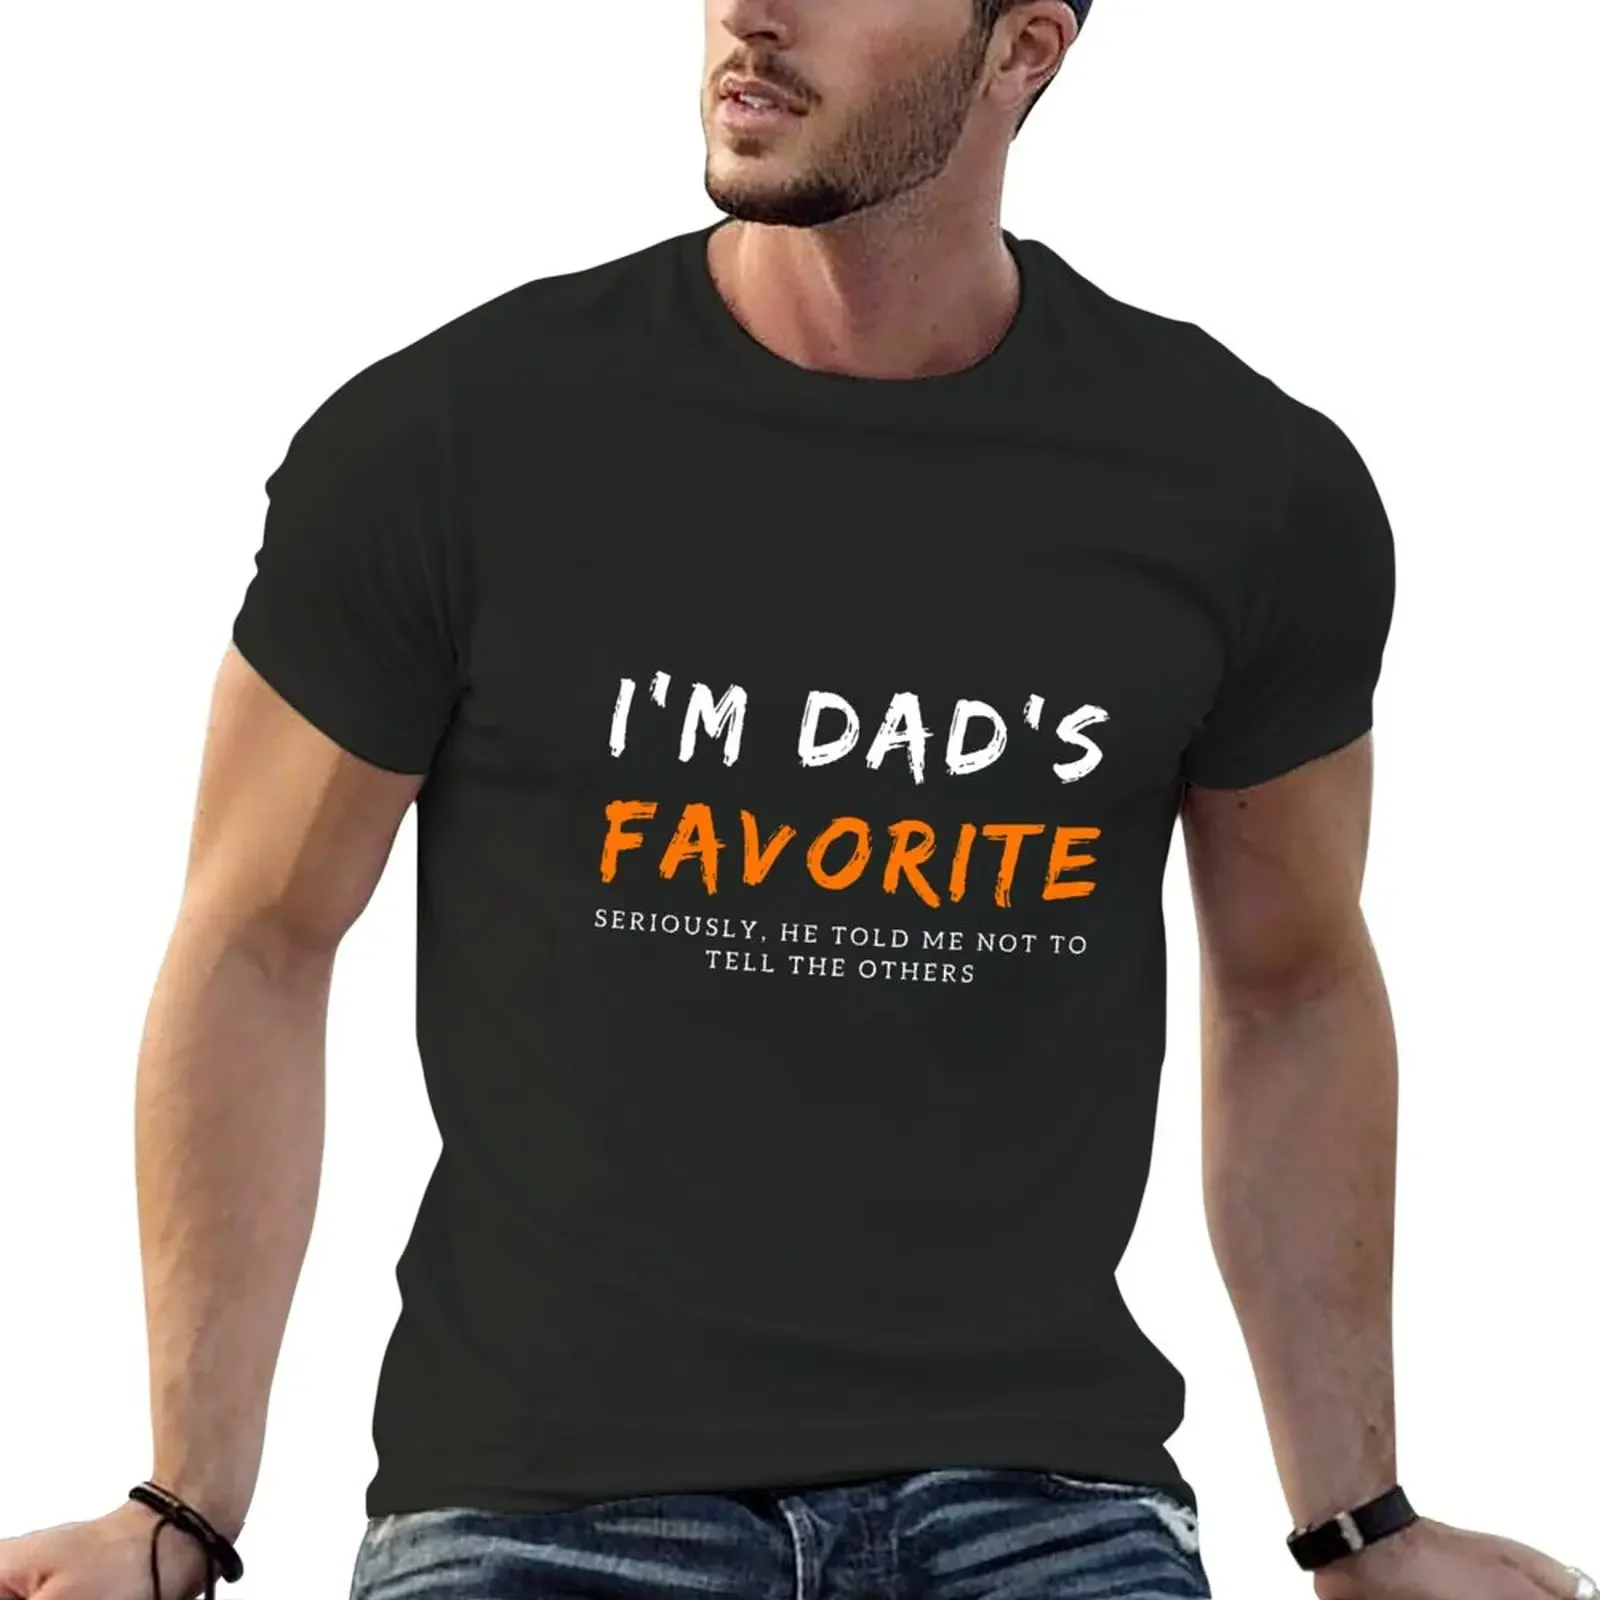 

i'm my dad's favorite seriously he told me not to tell the others T-Shirt tees sublime oversized t shirt men